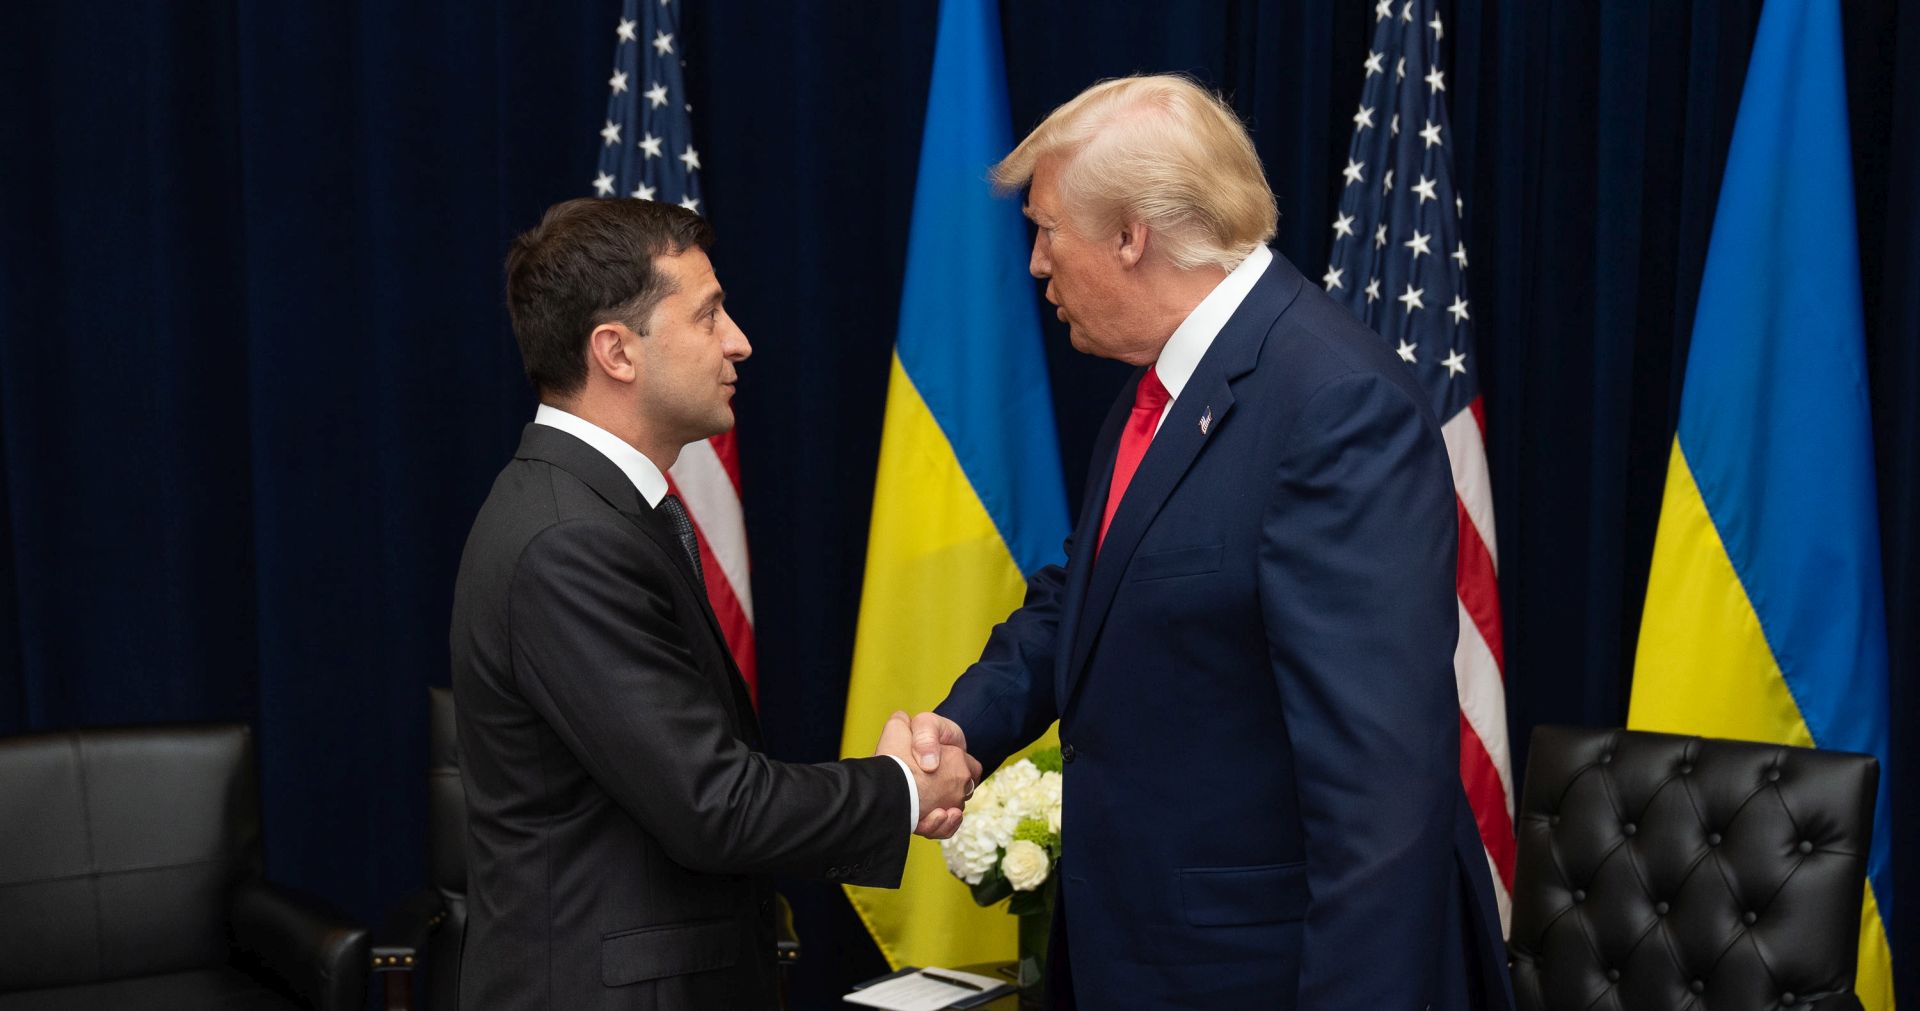 epa07869483 A handout photo made available by Ukraine Presidential Press Service shows Ukraine's President Volodymyr Zelensky (L) and US President Donald J. Trump (R) during a meeting on the sidelines of the 74th session of the United Nations General Assembly in New York, New York, USA, 25 September 2019. The annual meeting of world leaders at the United Nations runs until 30 September 2019.  EPA/UKRAINE PRESIDENTIAL PRESS SERVICE / HANDOUT  HANDOUT EDITORIAL USE ONLY/NO SALES